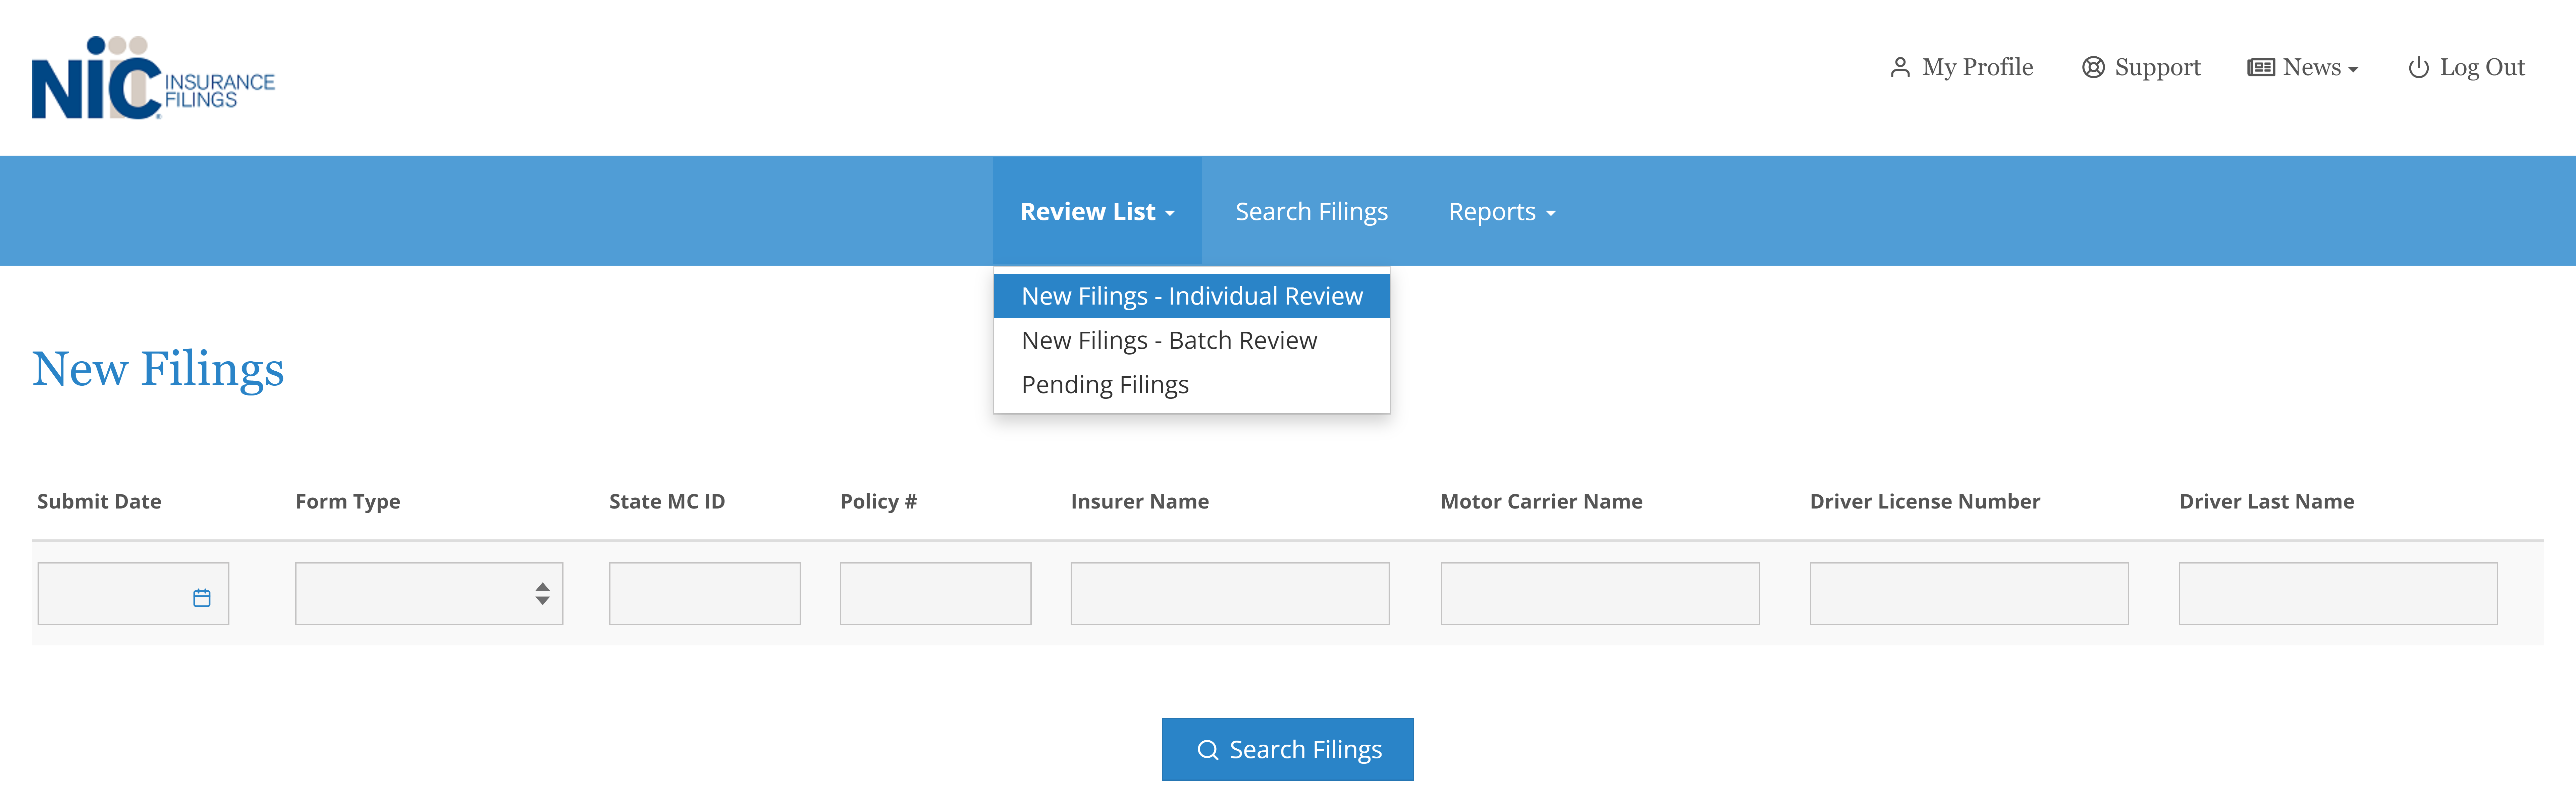 Screen shot showing selection of New Filings - Individual Review under the Review List menu.